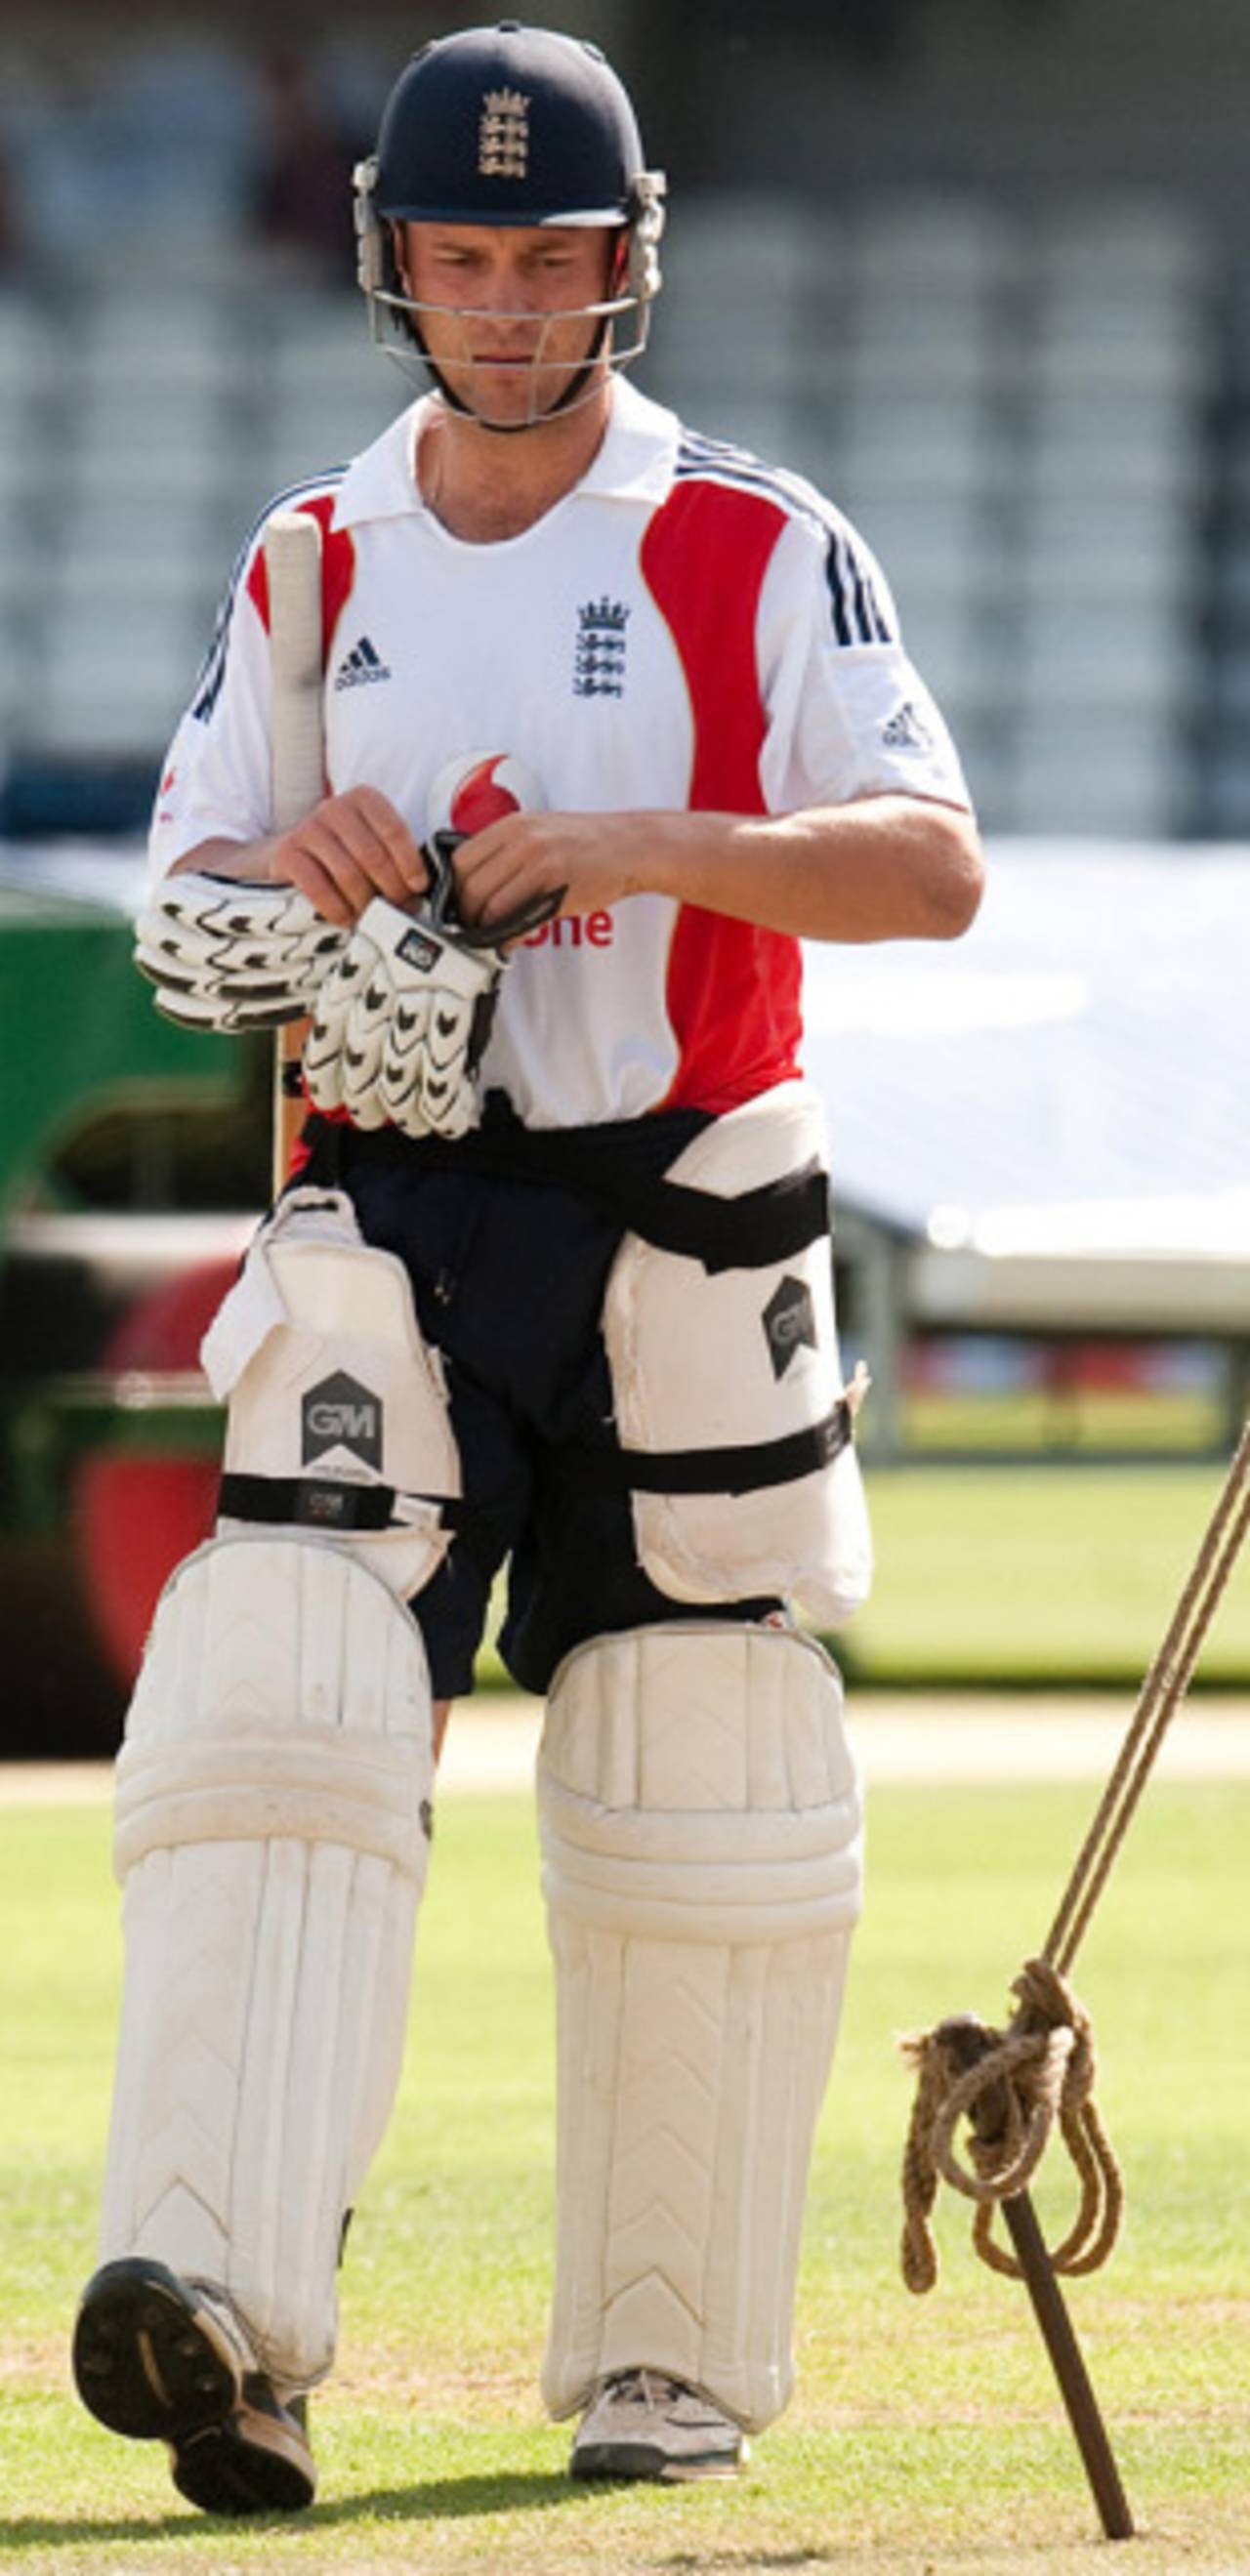 Jonathan Trott prepares for batting practice, The Oval, August 19, 2009